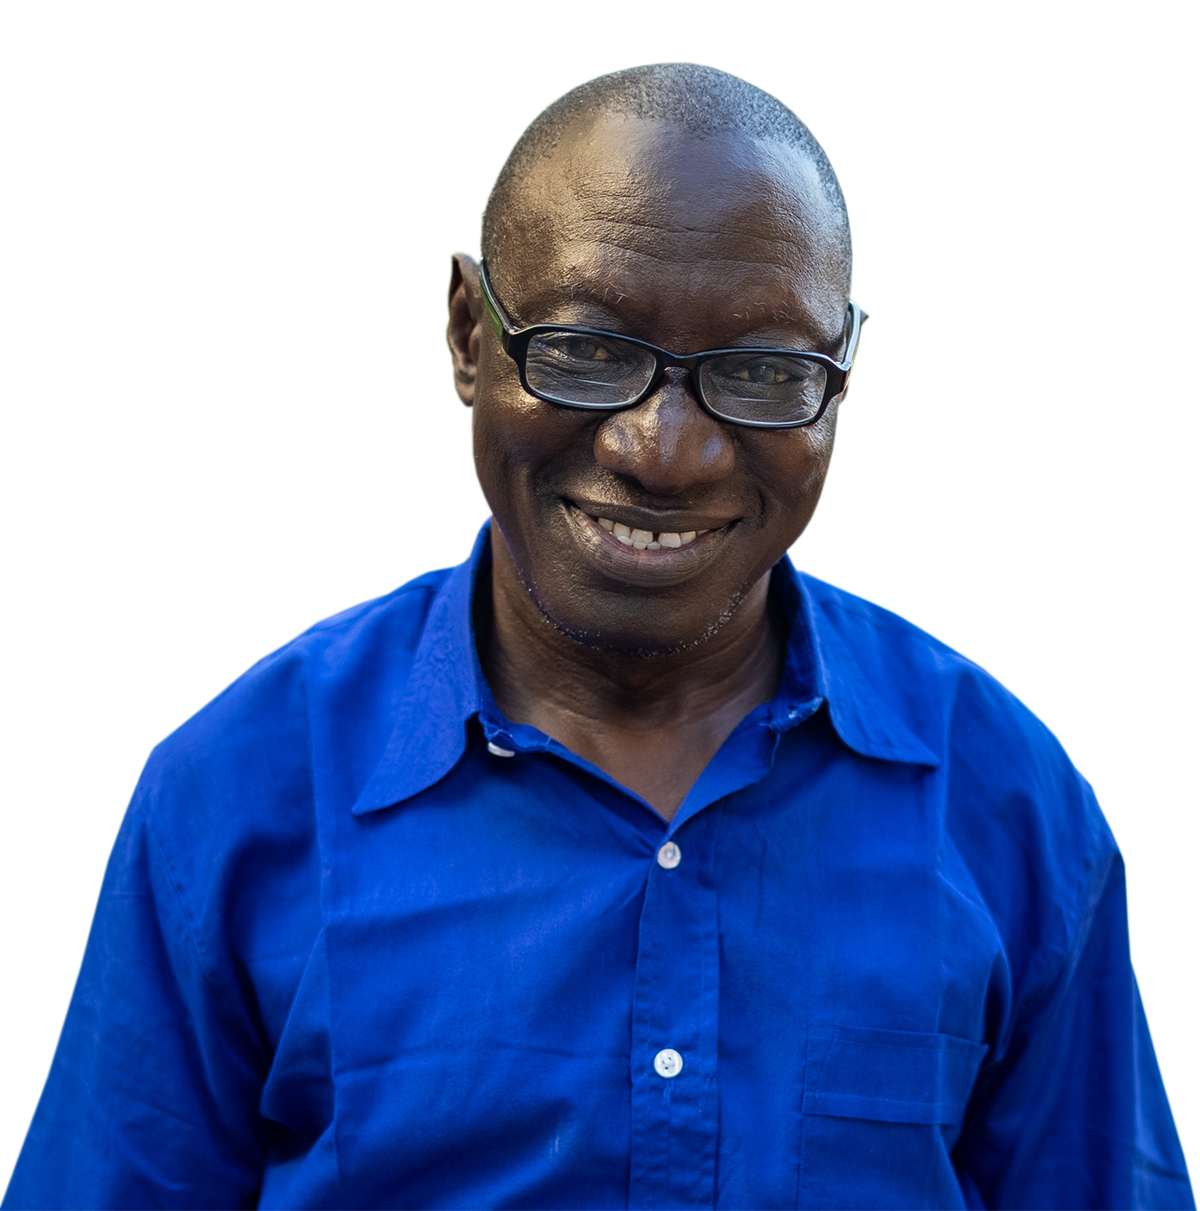 Image of Pastor Bagne, of the Contemporary Wolof Bible translation team, Senegal